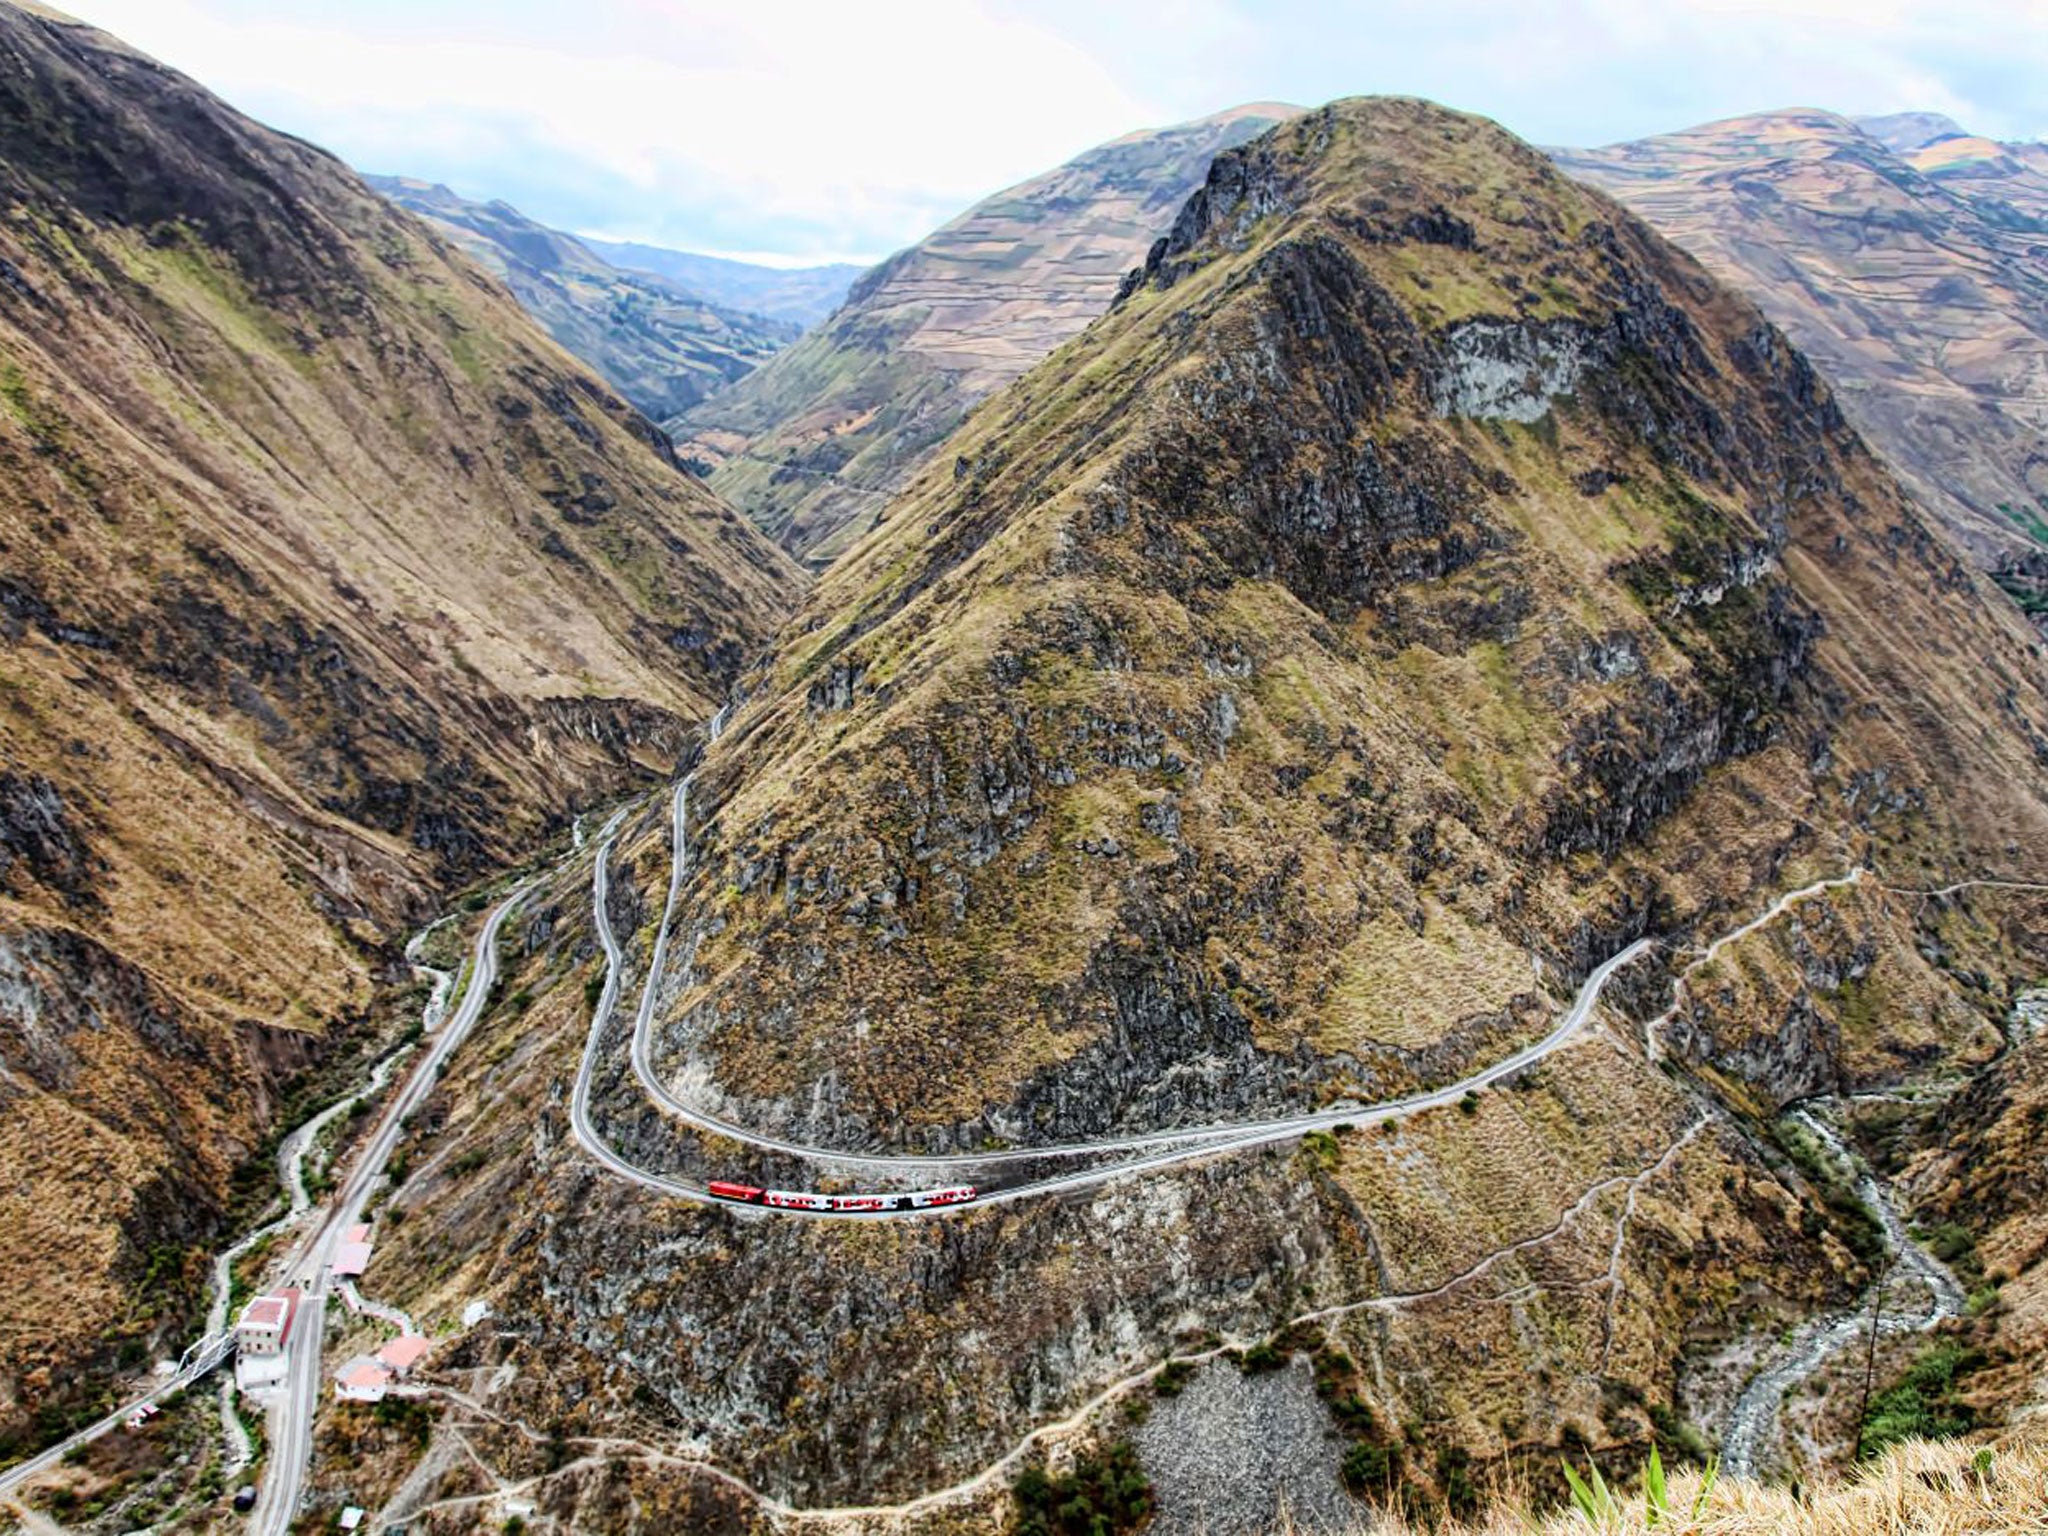 A train follows the route of the Devil’s Nose